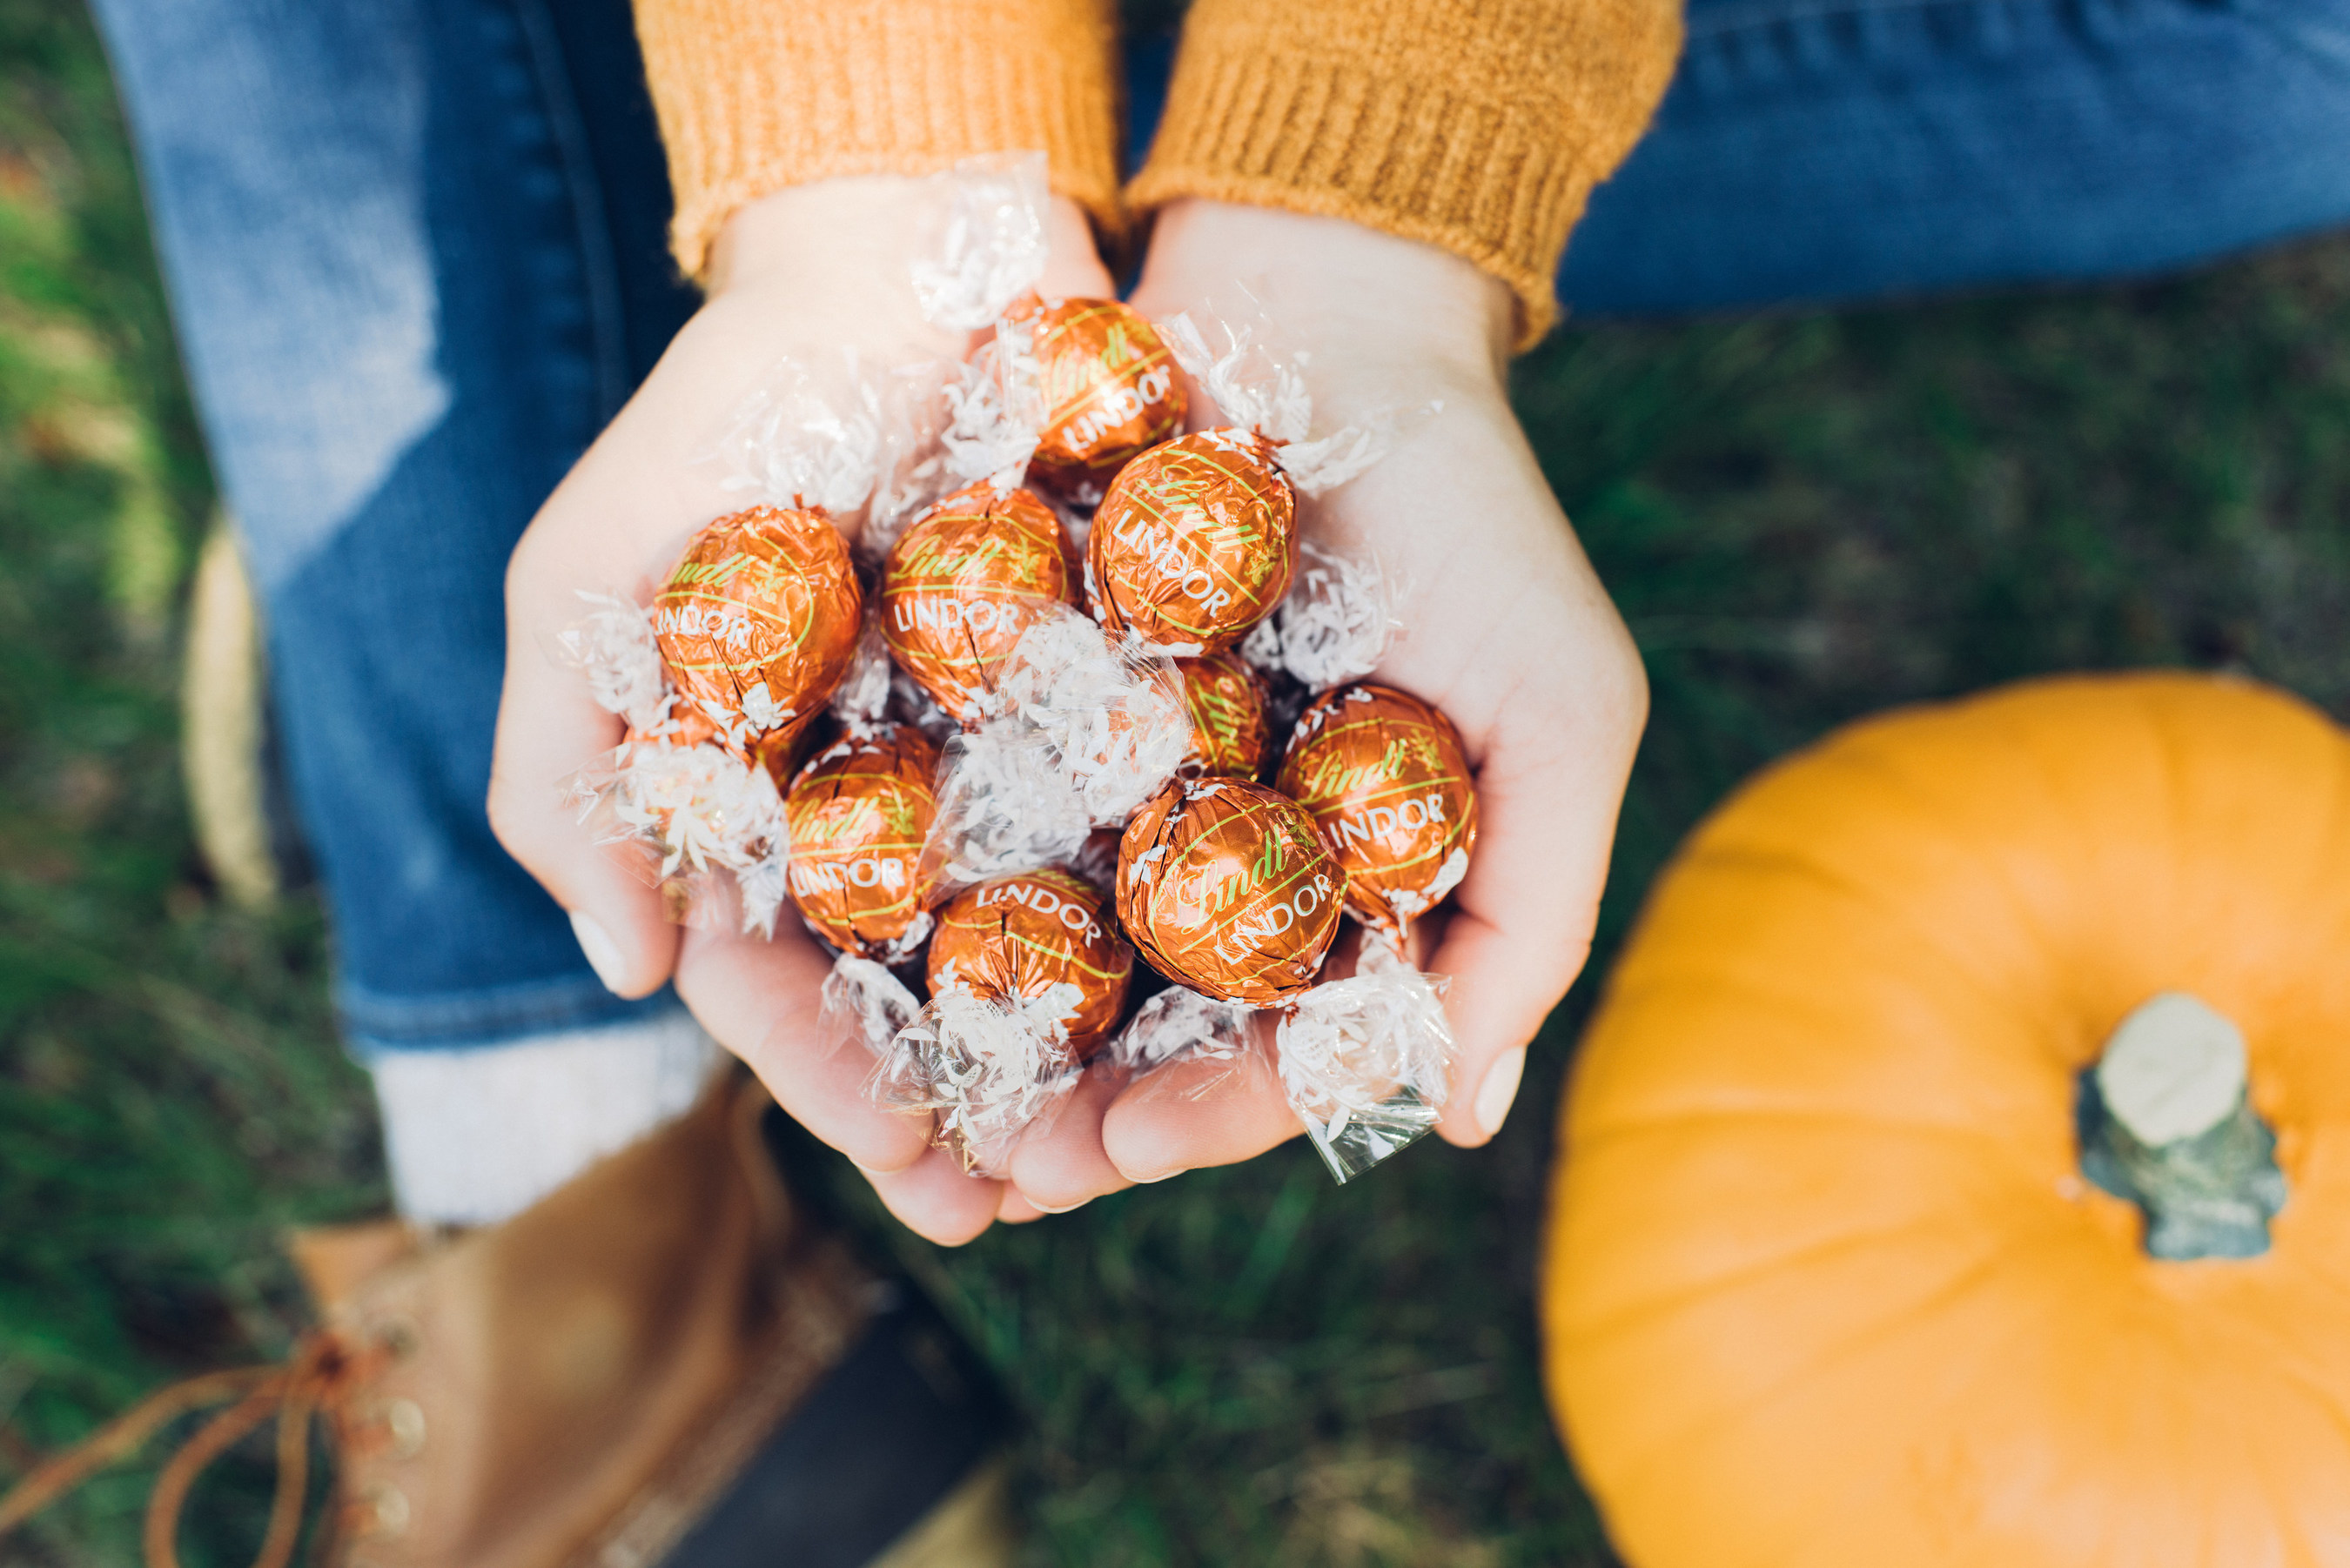 Fall in love with a new favorite: Lindt LINDOR Pumpkin Spice truffles. Photo credit: Wells & Grace